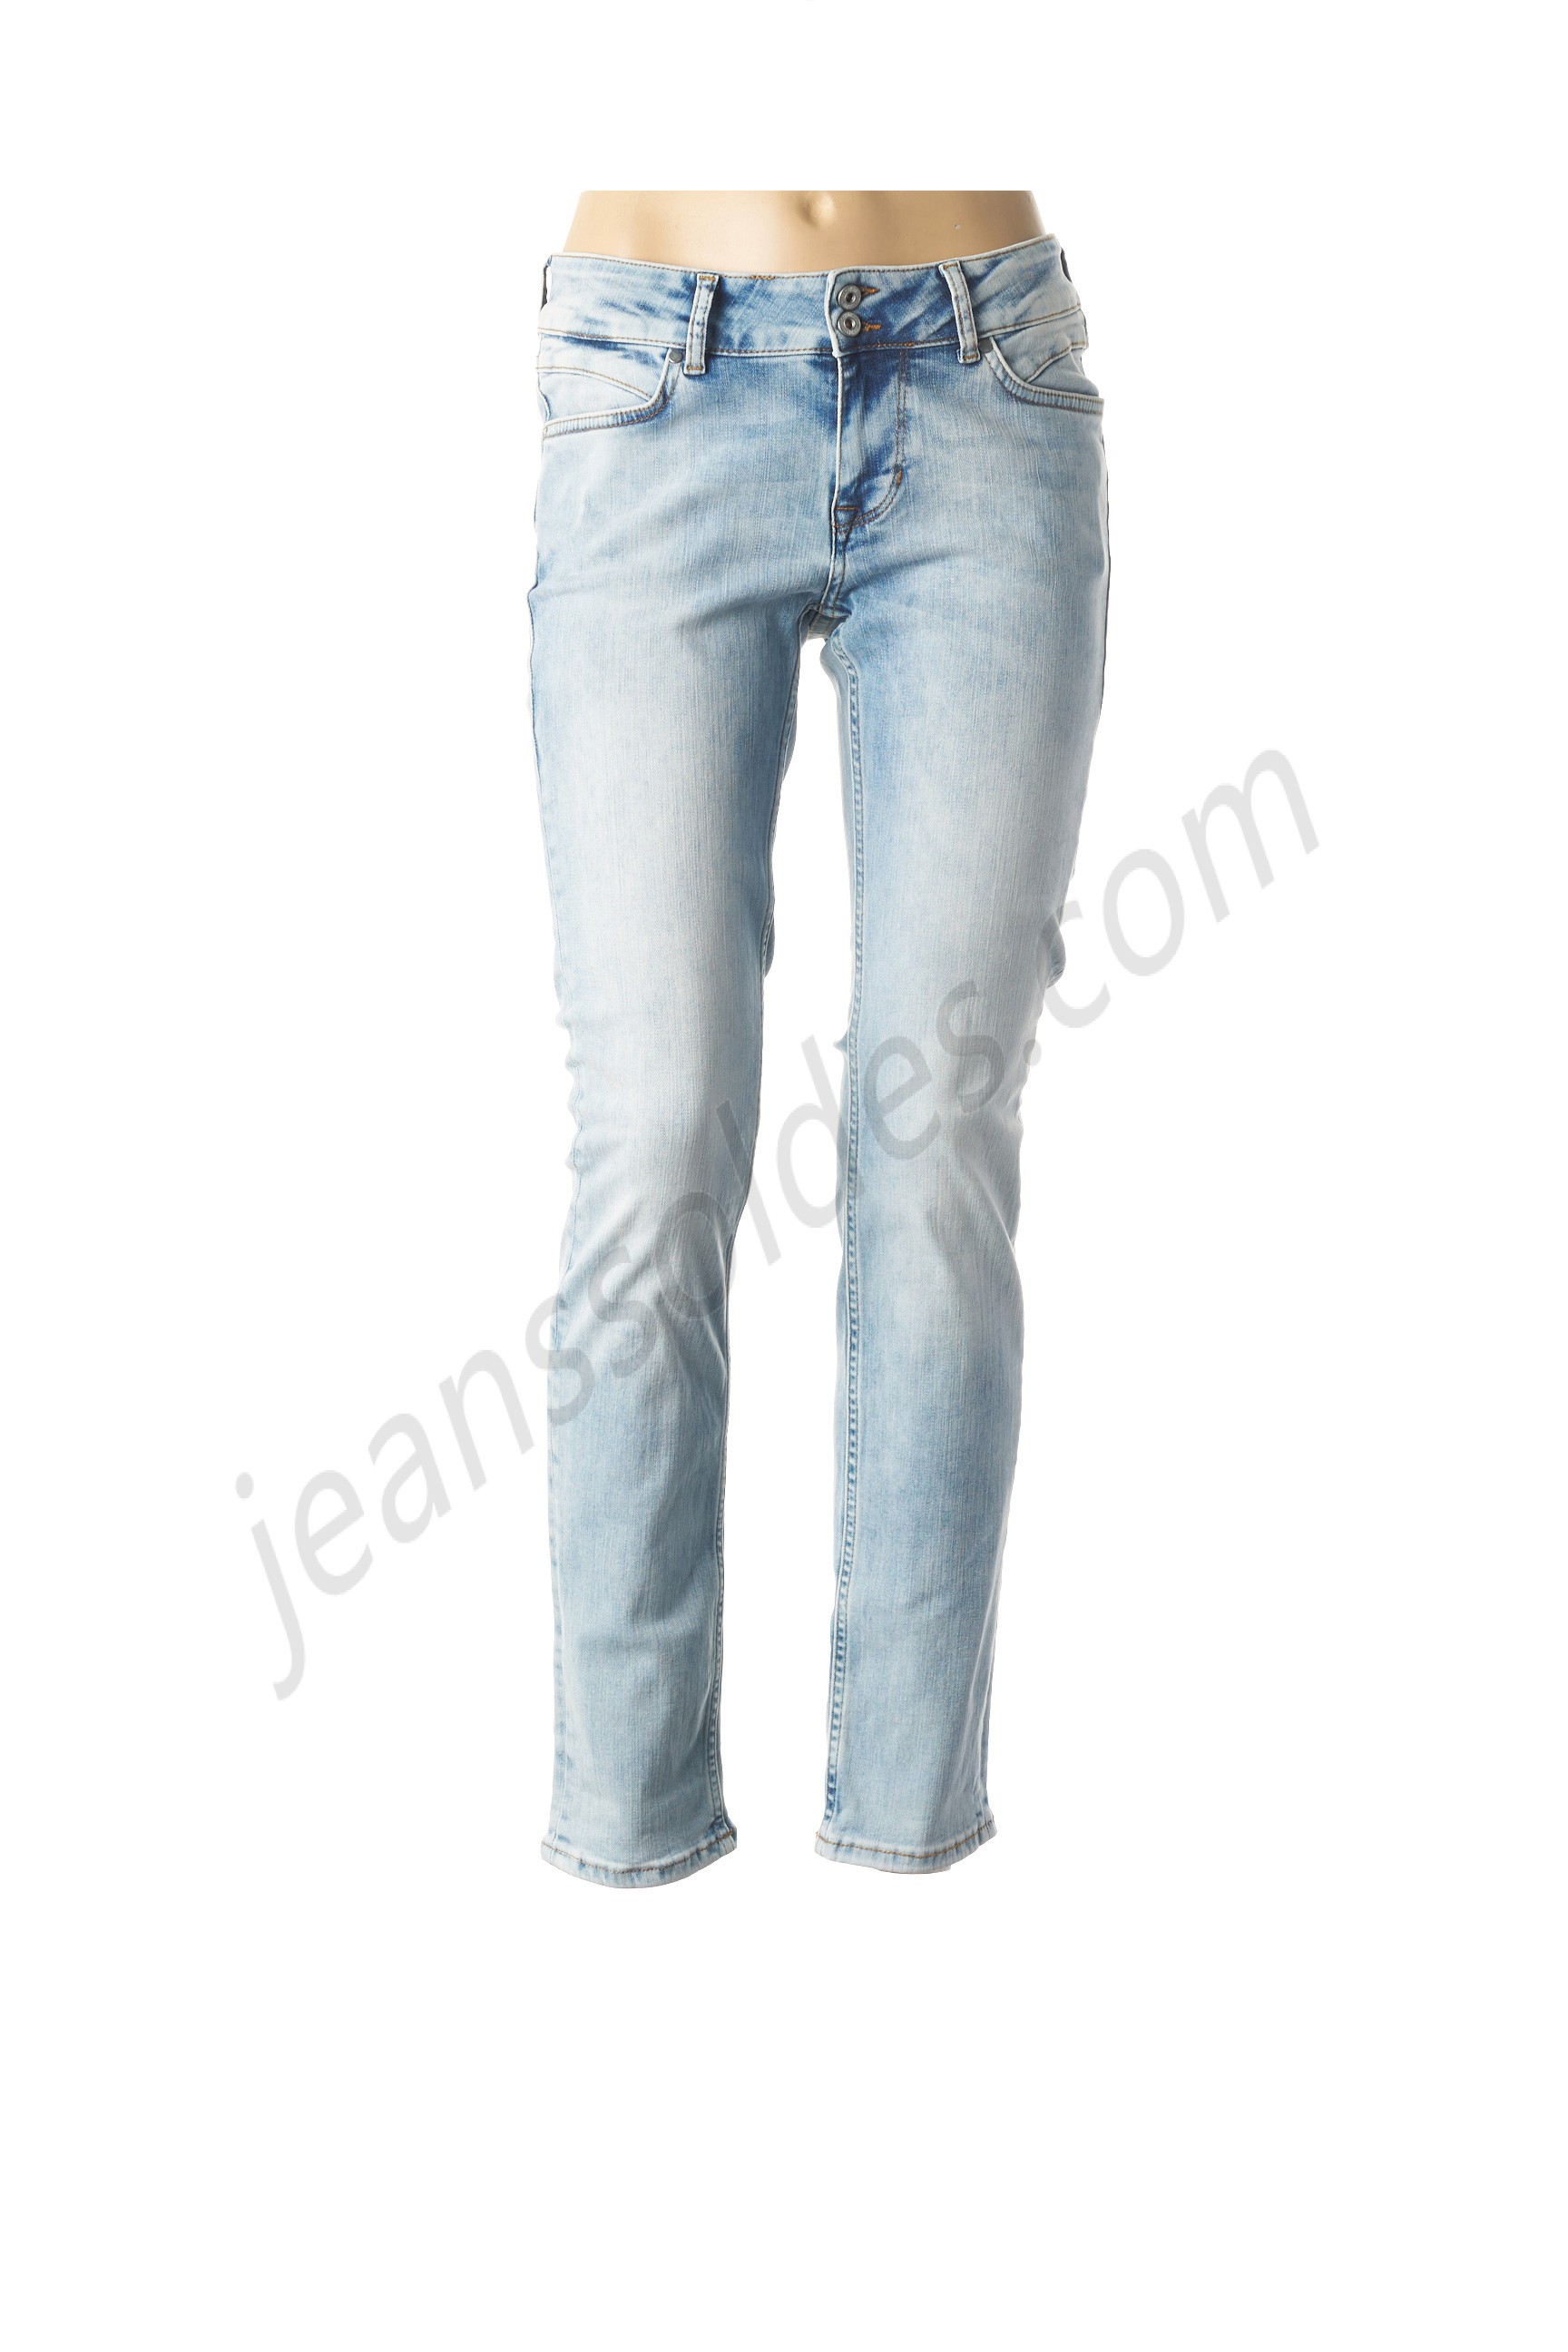 mustang-Jeans coupe slim prix d’amis - mustang-Jeans coupe slim prix d’amis